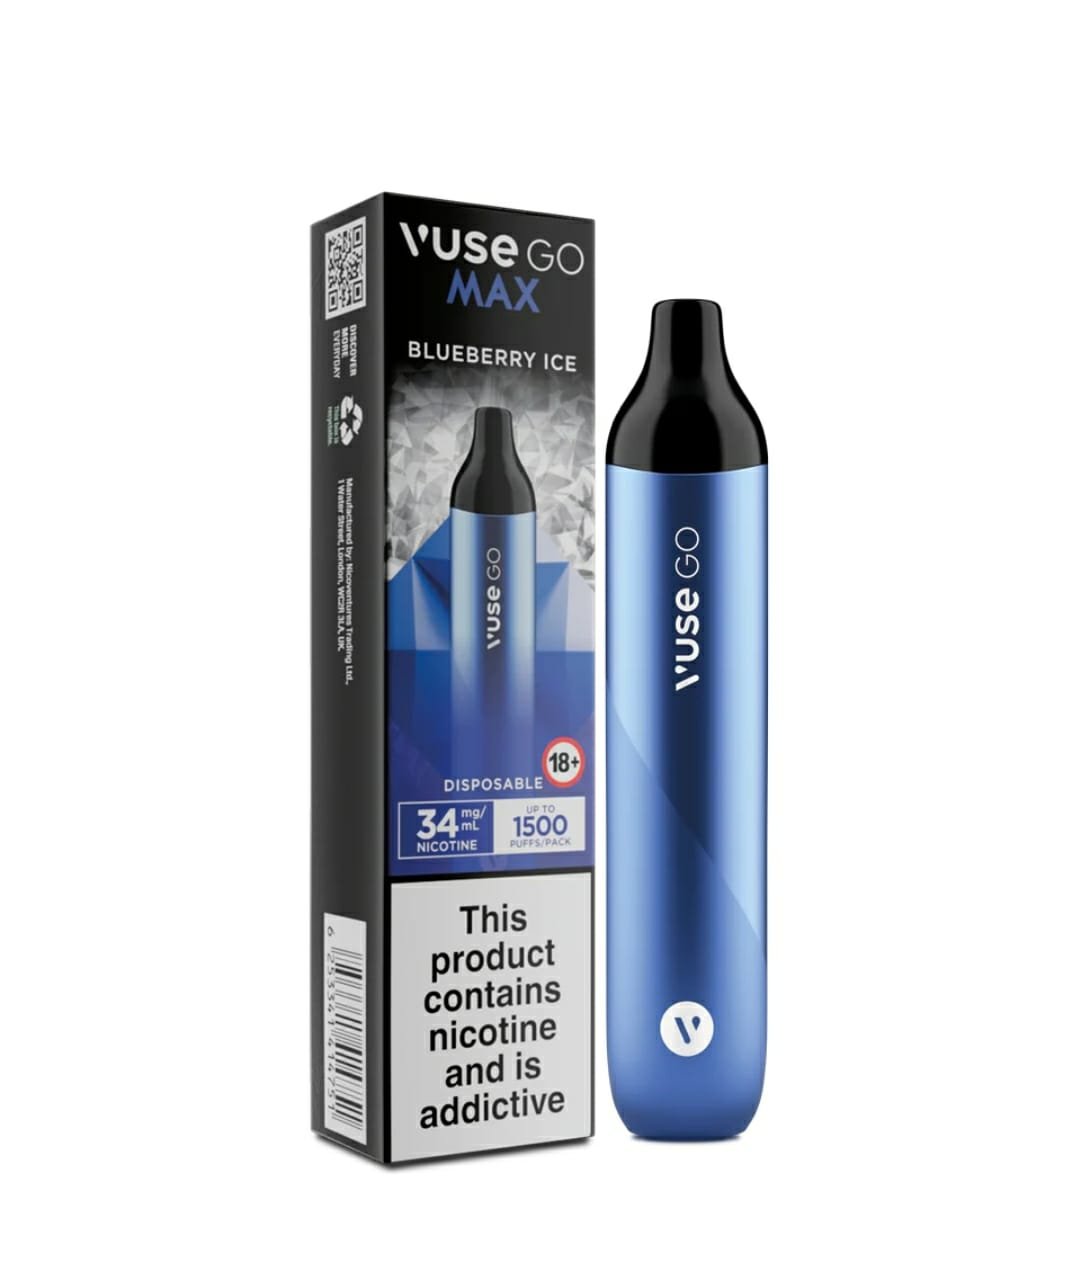 vuse-go-max-disposable-blueberry-ice-1500-puffs